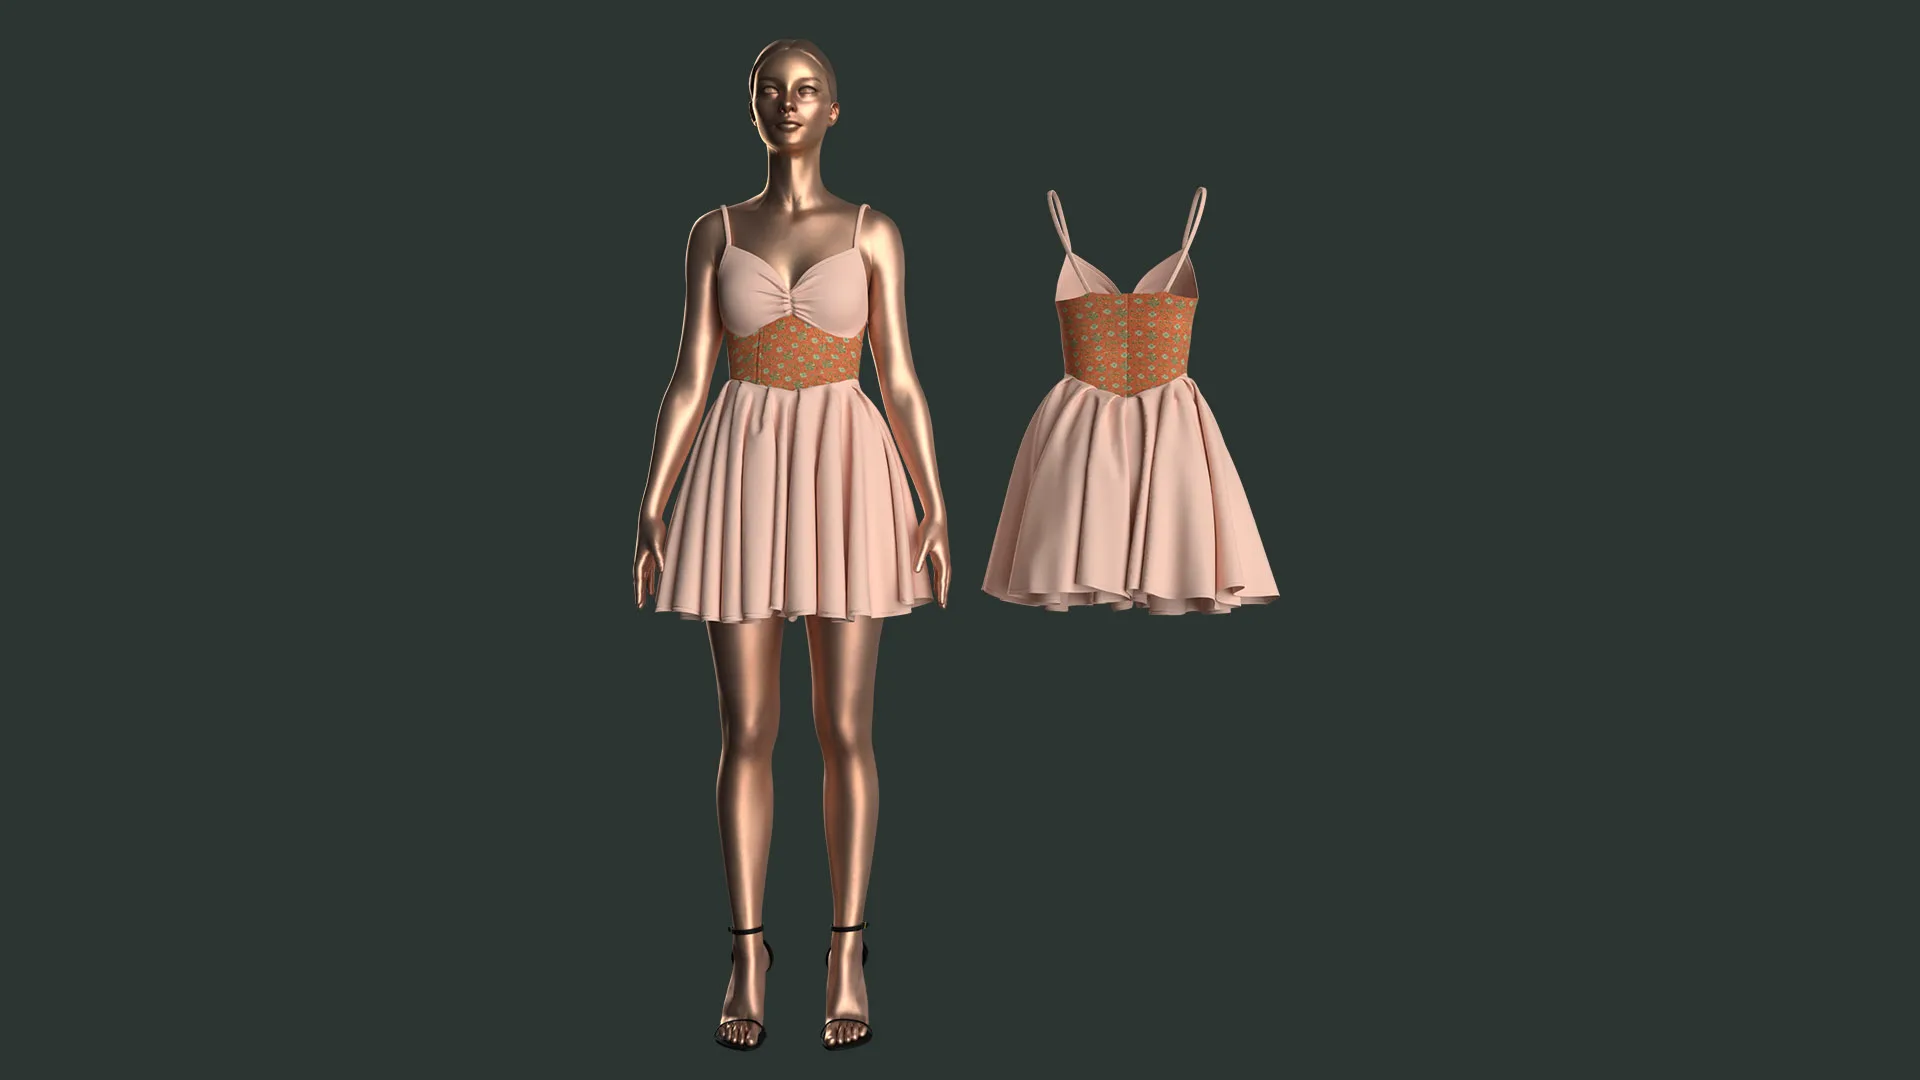 3 Dress made in Marvelous / Clo3D